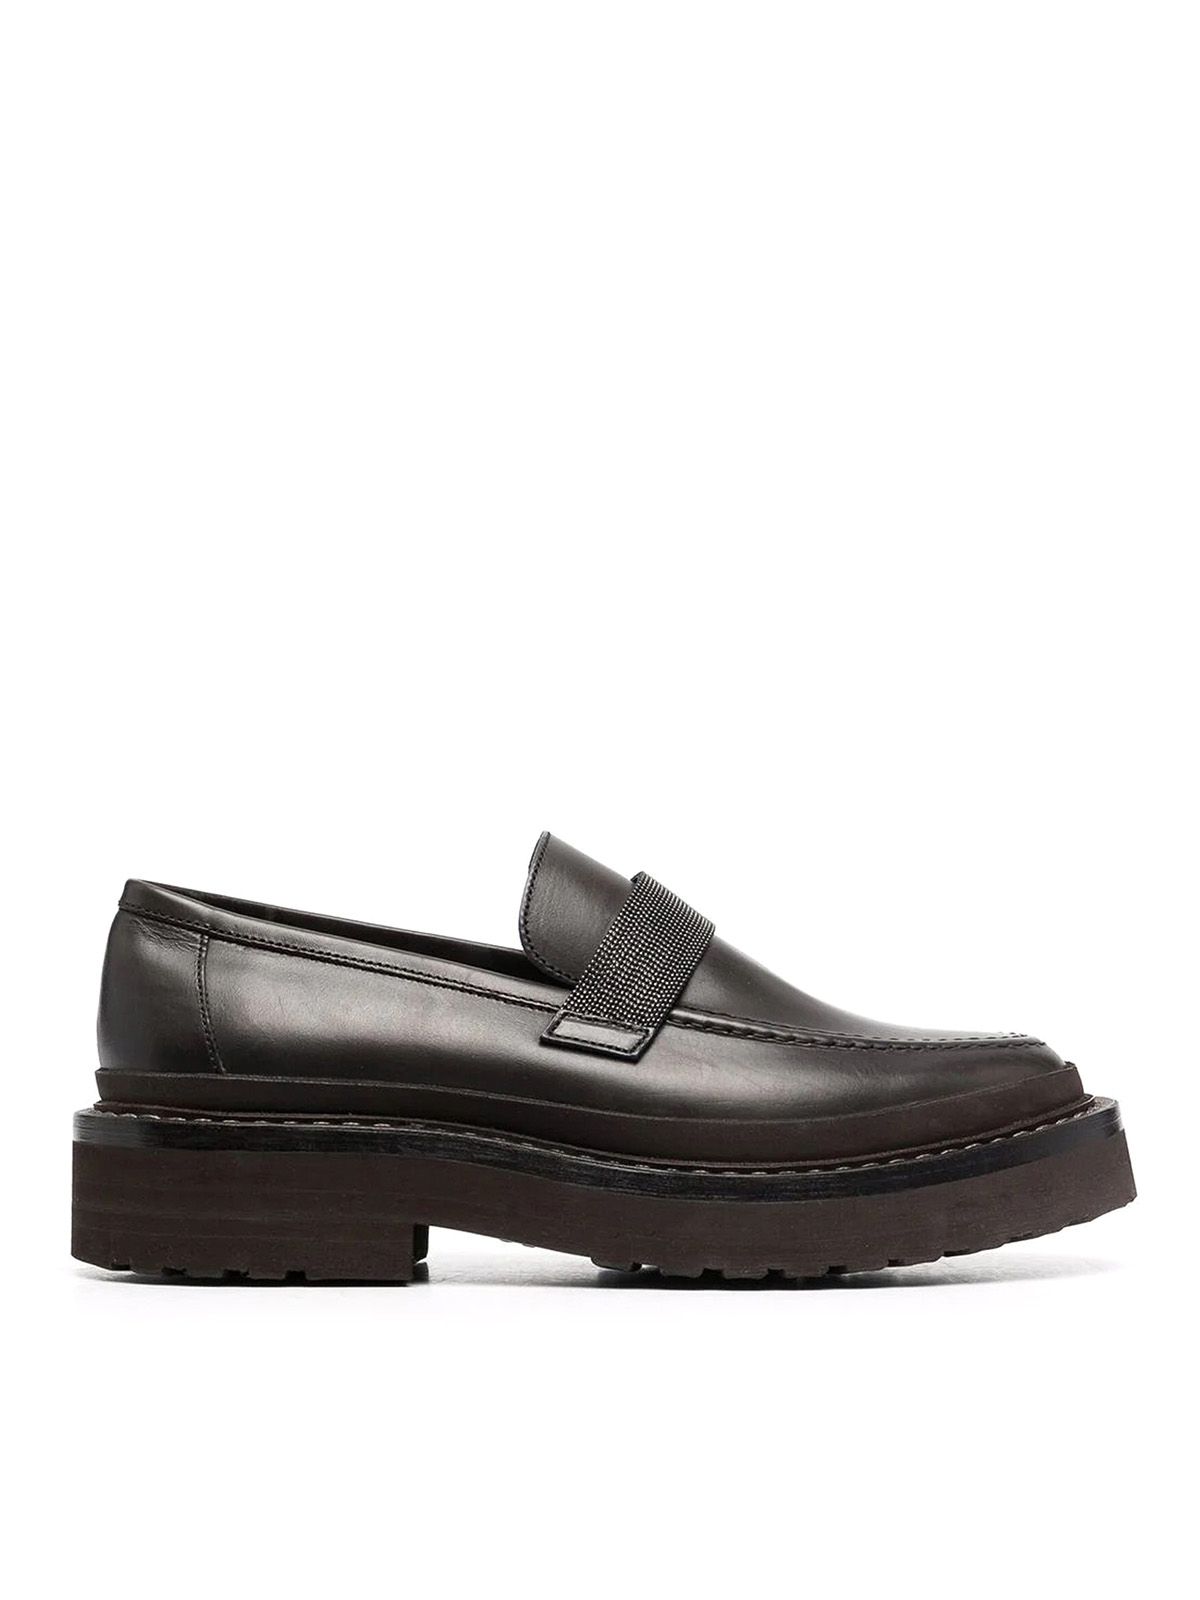 Brunello Cucinelli Leather Loafers In Marrón Oscuro